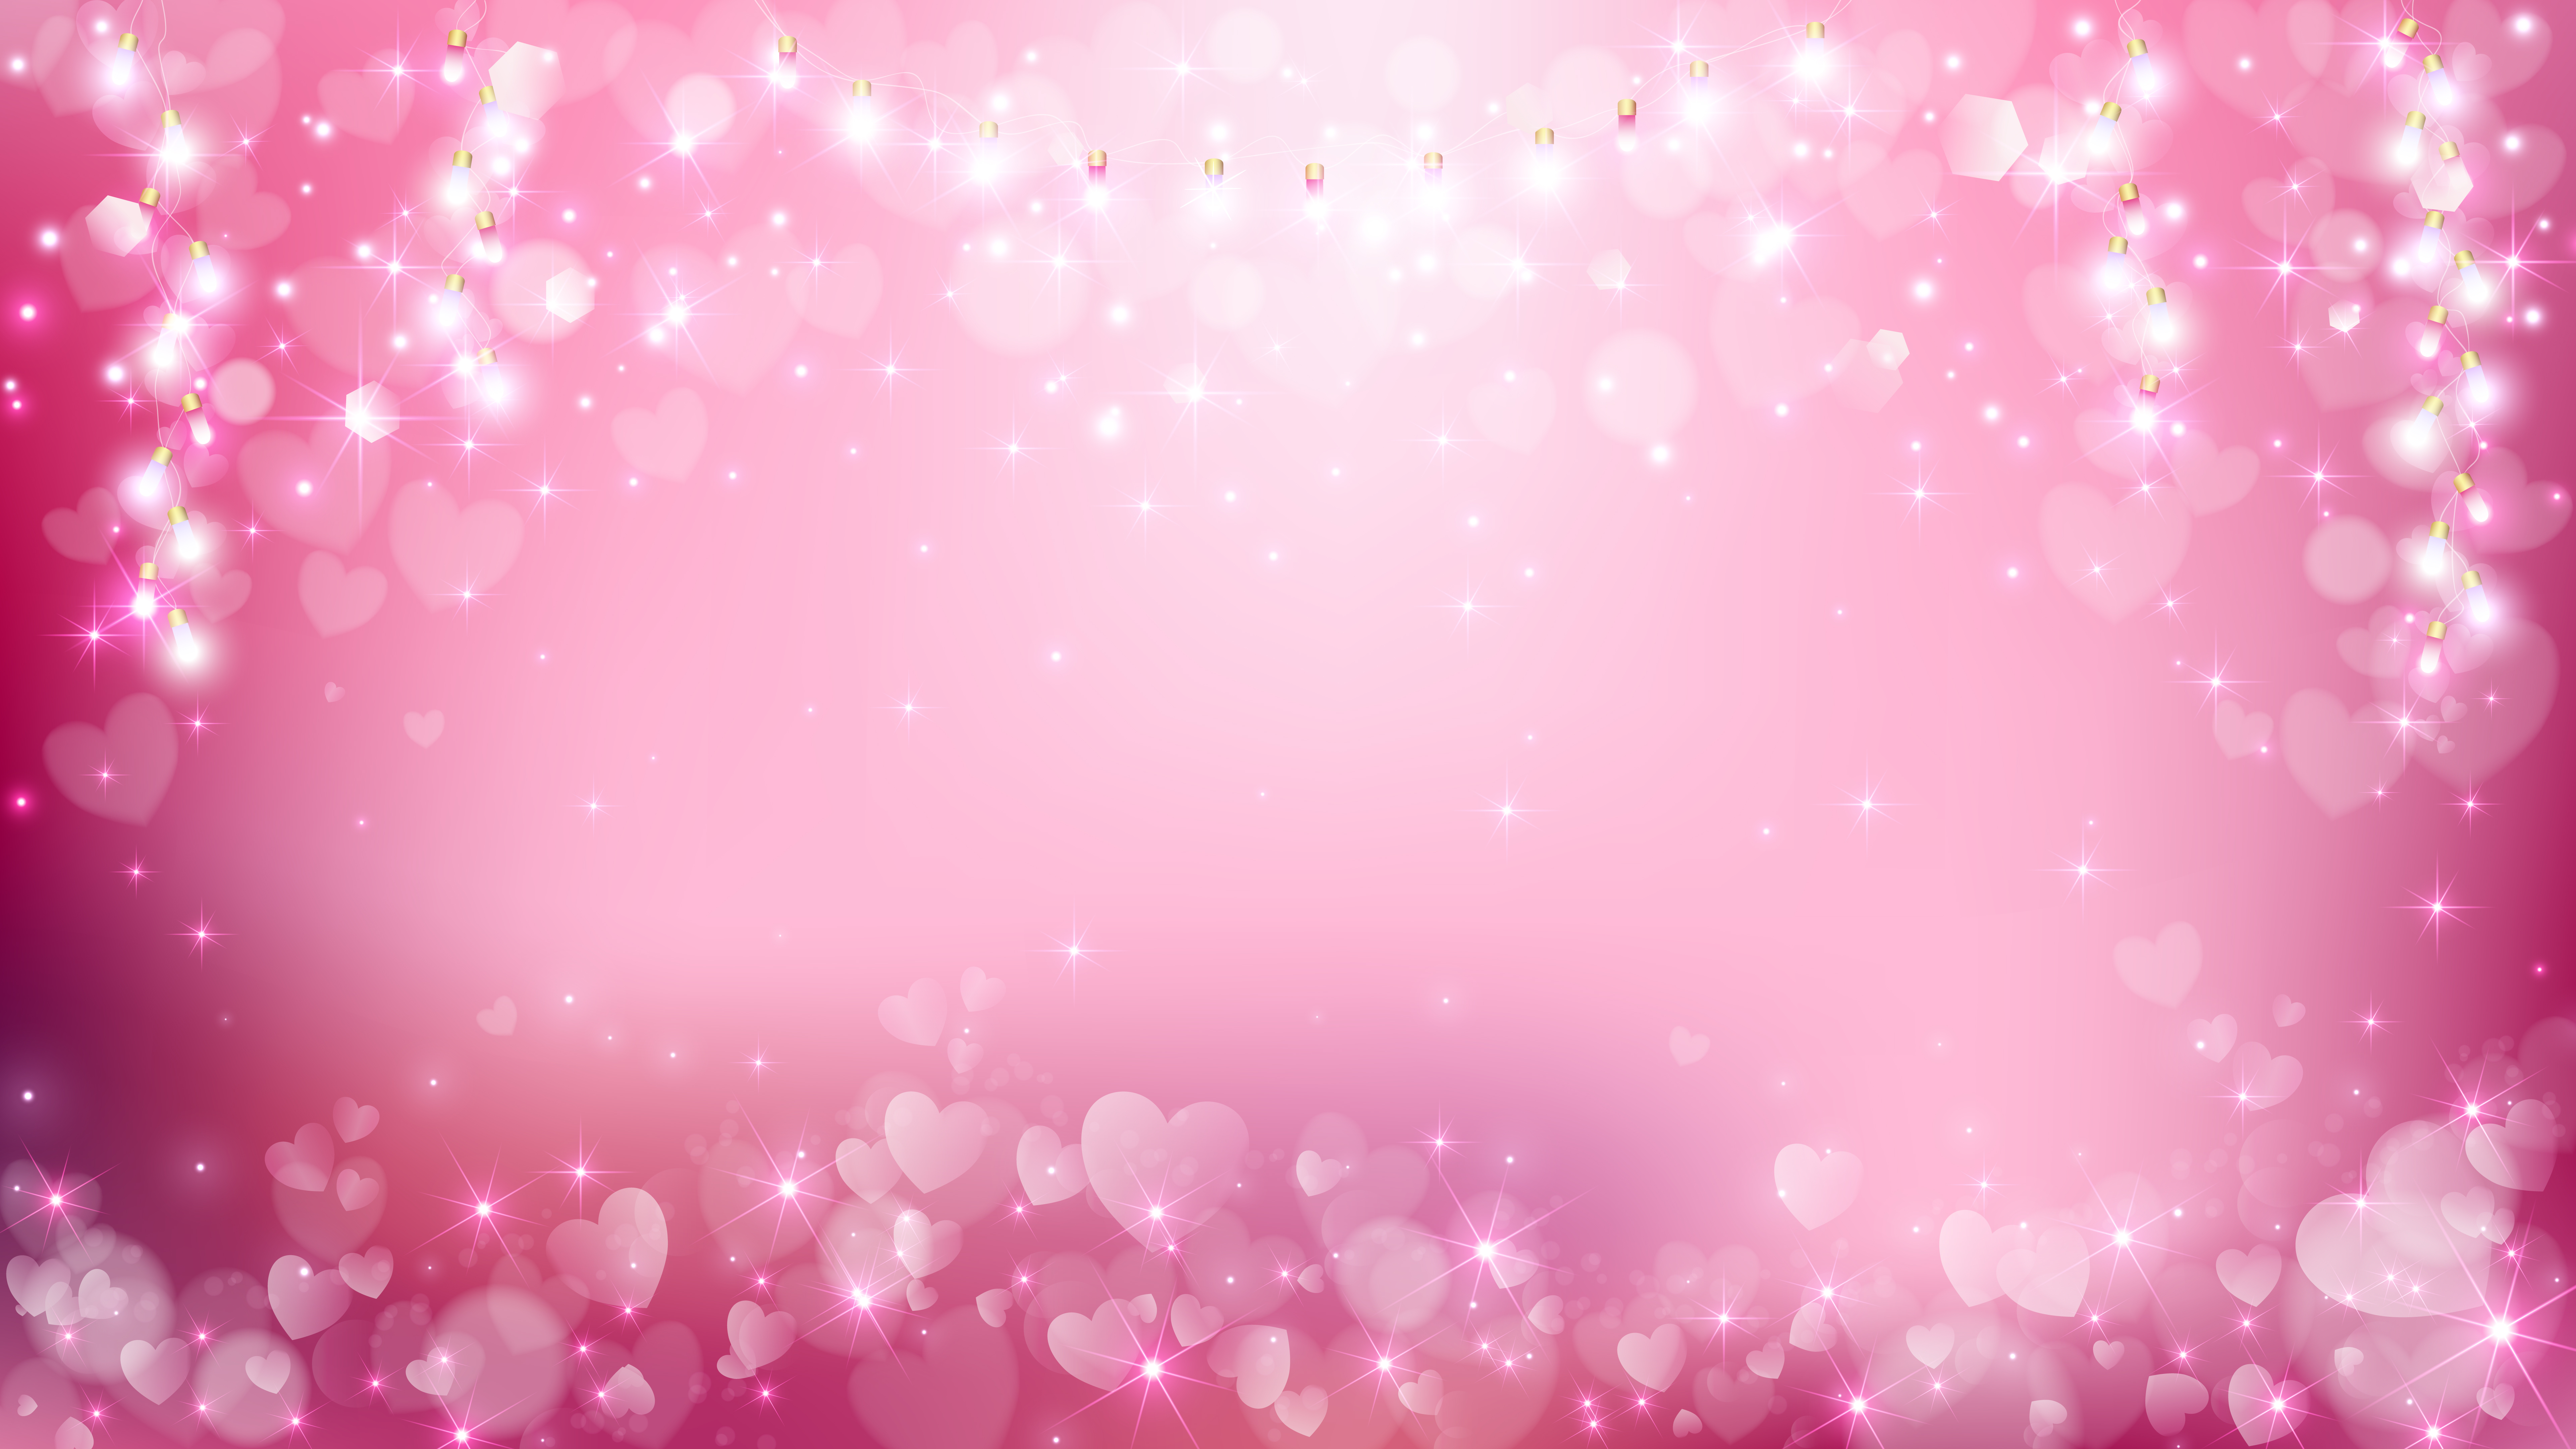 Soft pastel valentine background with hearts and light string